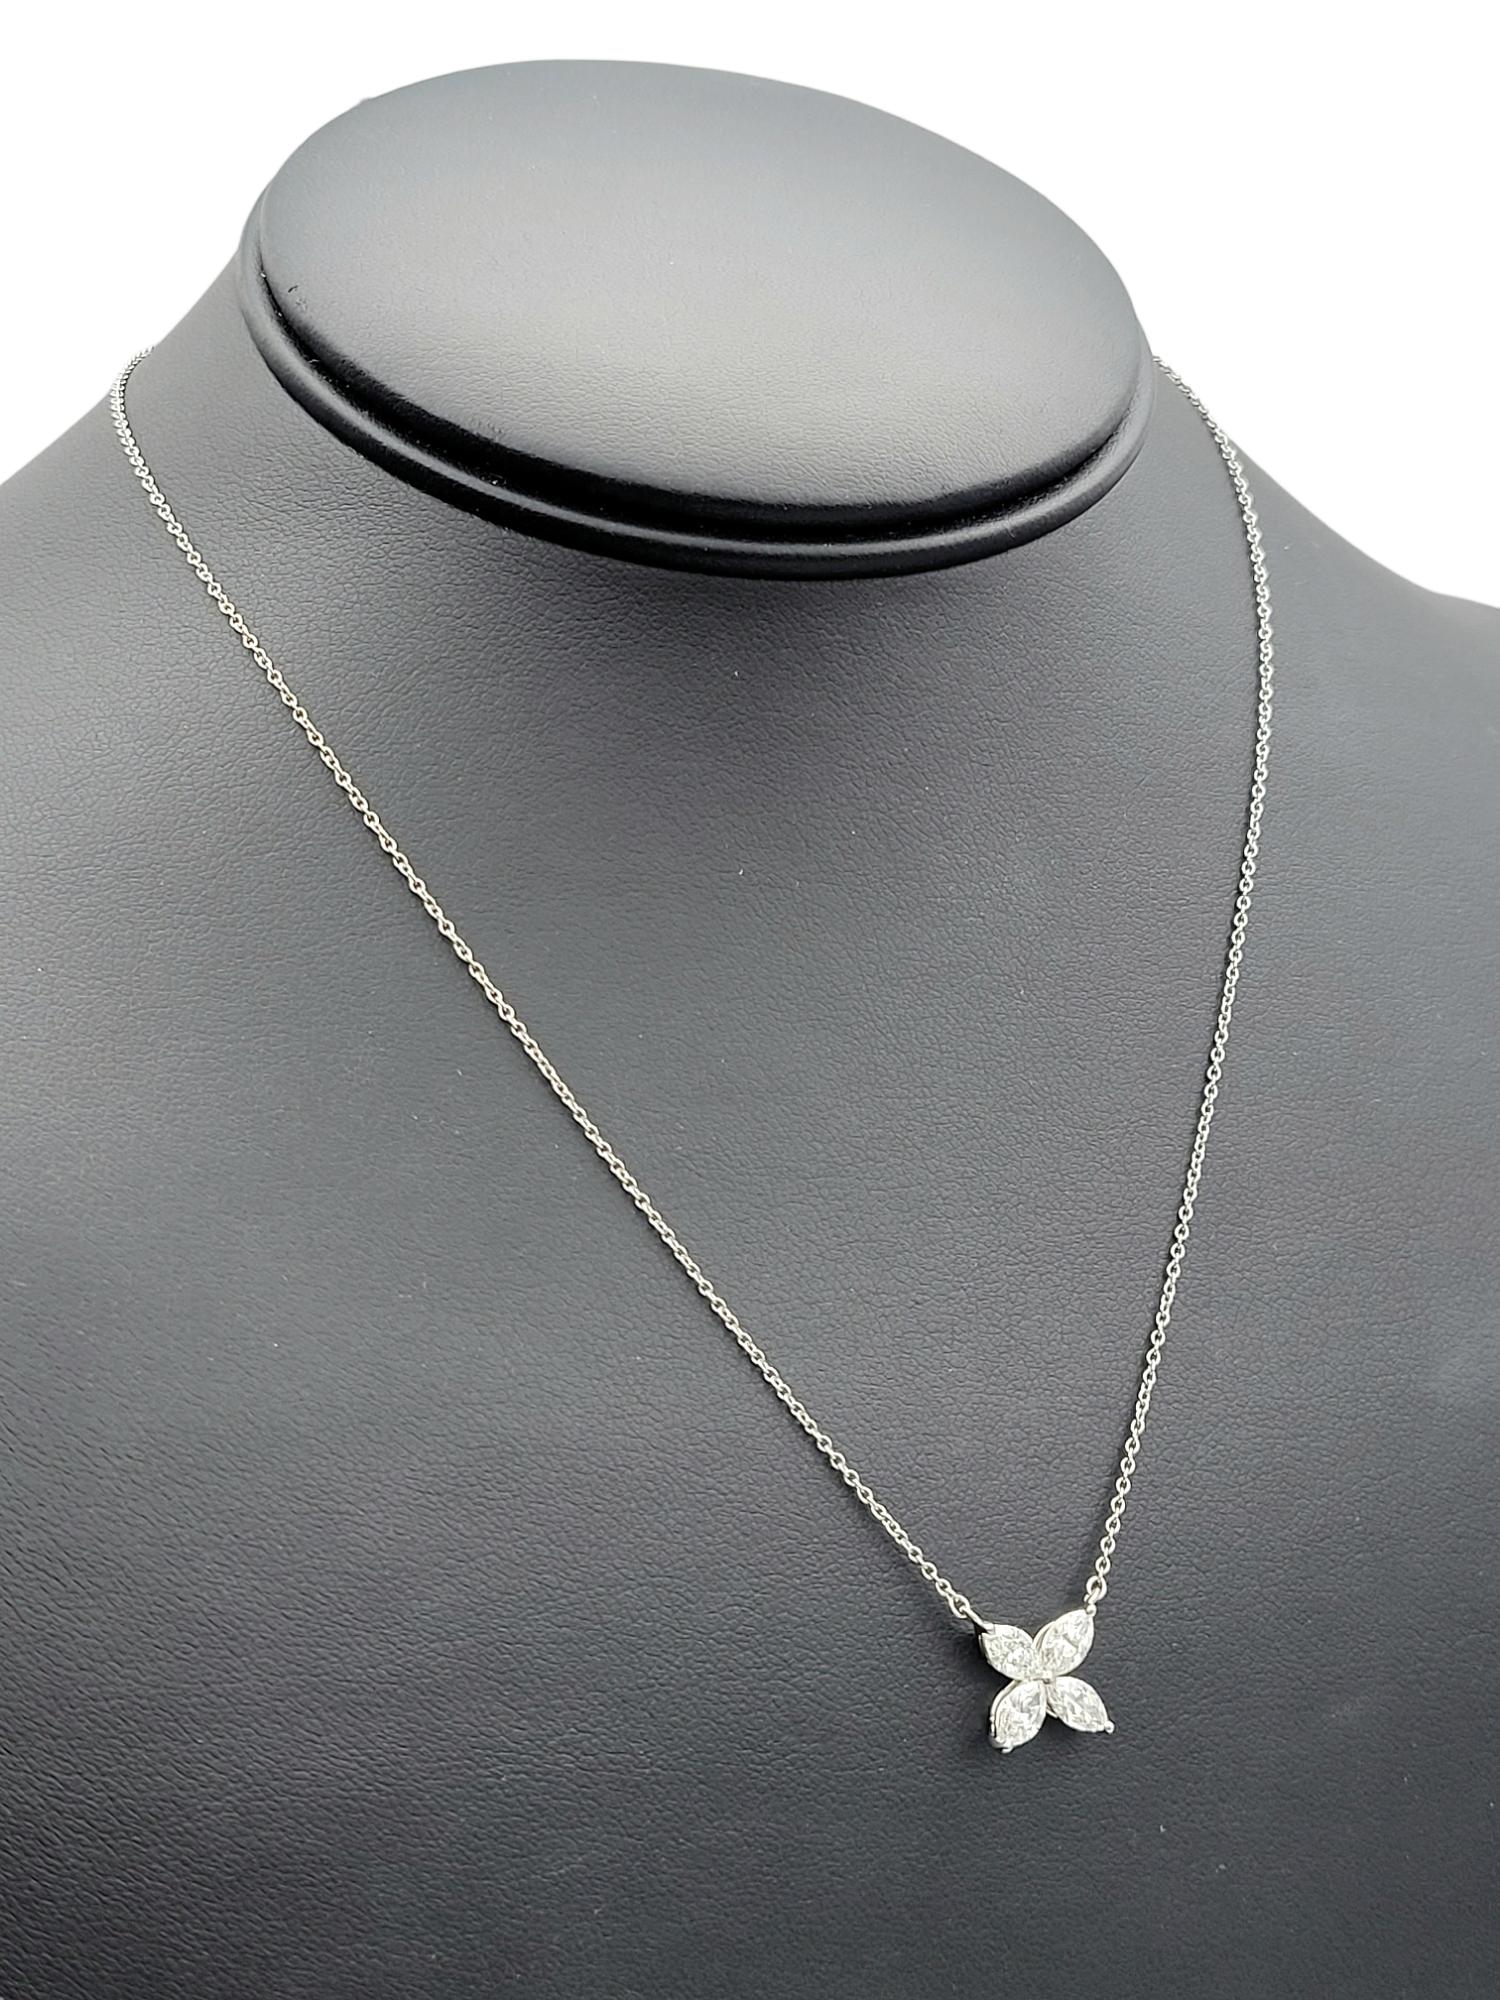 Tiffany & Co. Victoria Diamond .92 Carats Large Pendant Necklace in Platinum For Sale 3